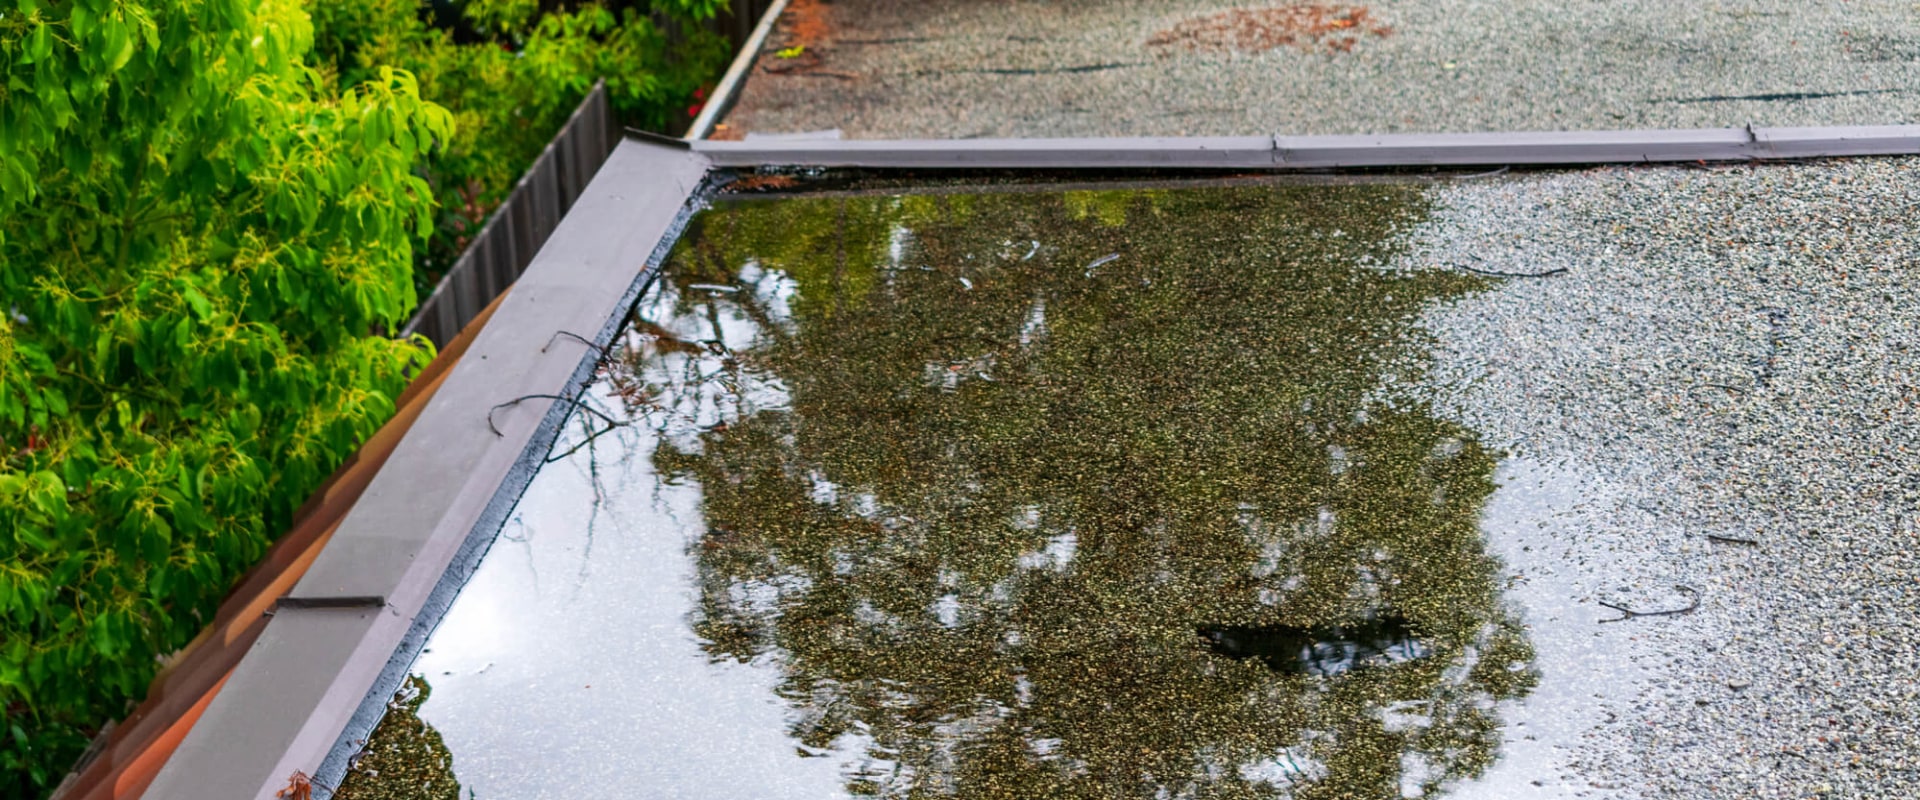 Does roofing felt keep water out?